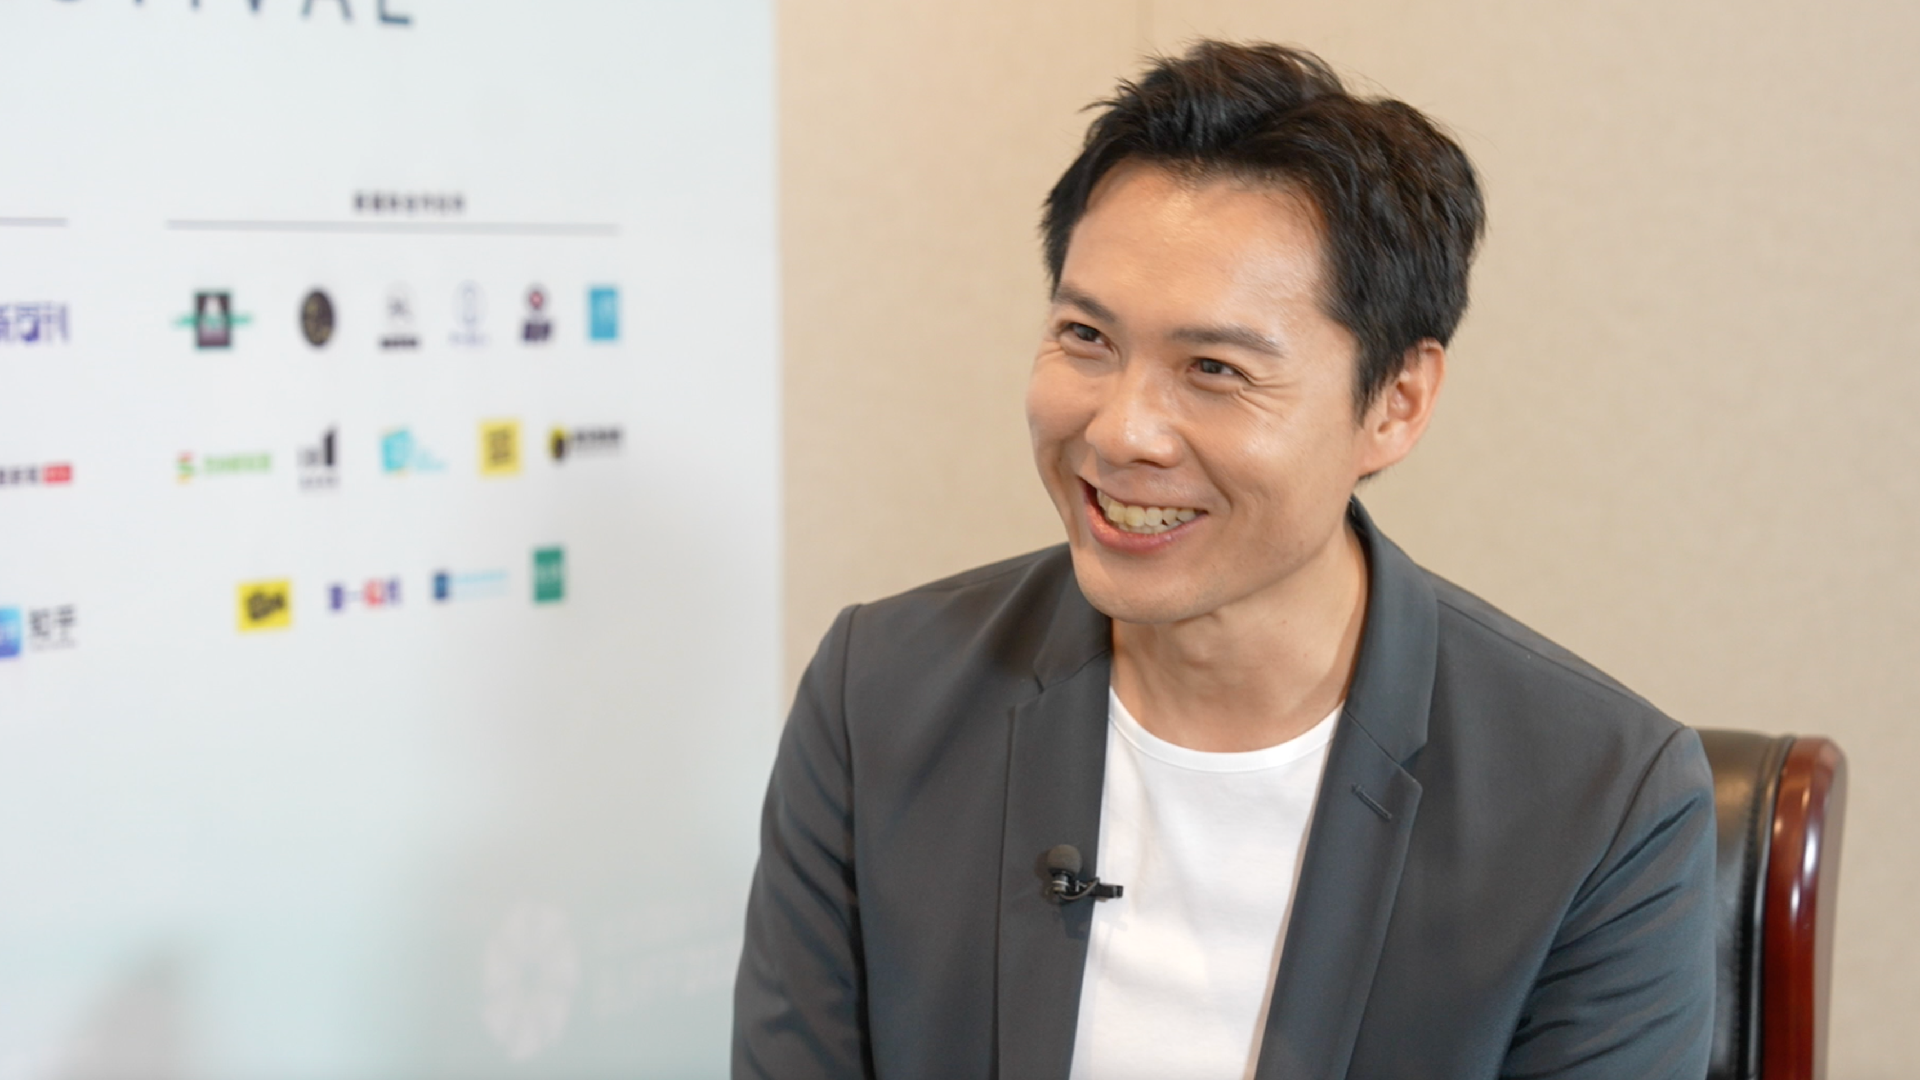 Singaporeans are very risk-averse': Director Anthony Chen on